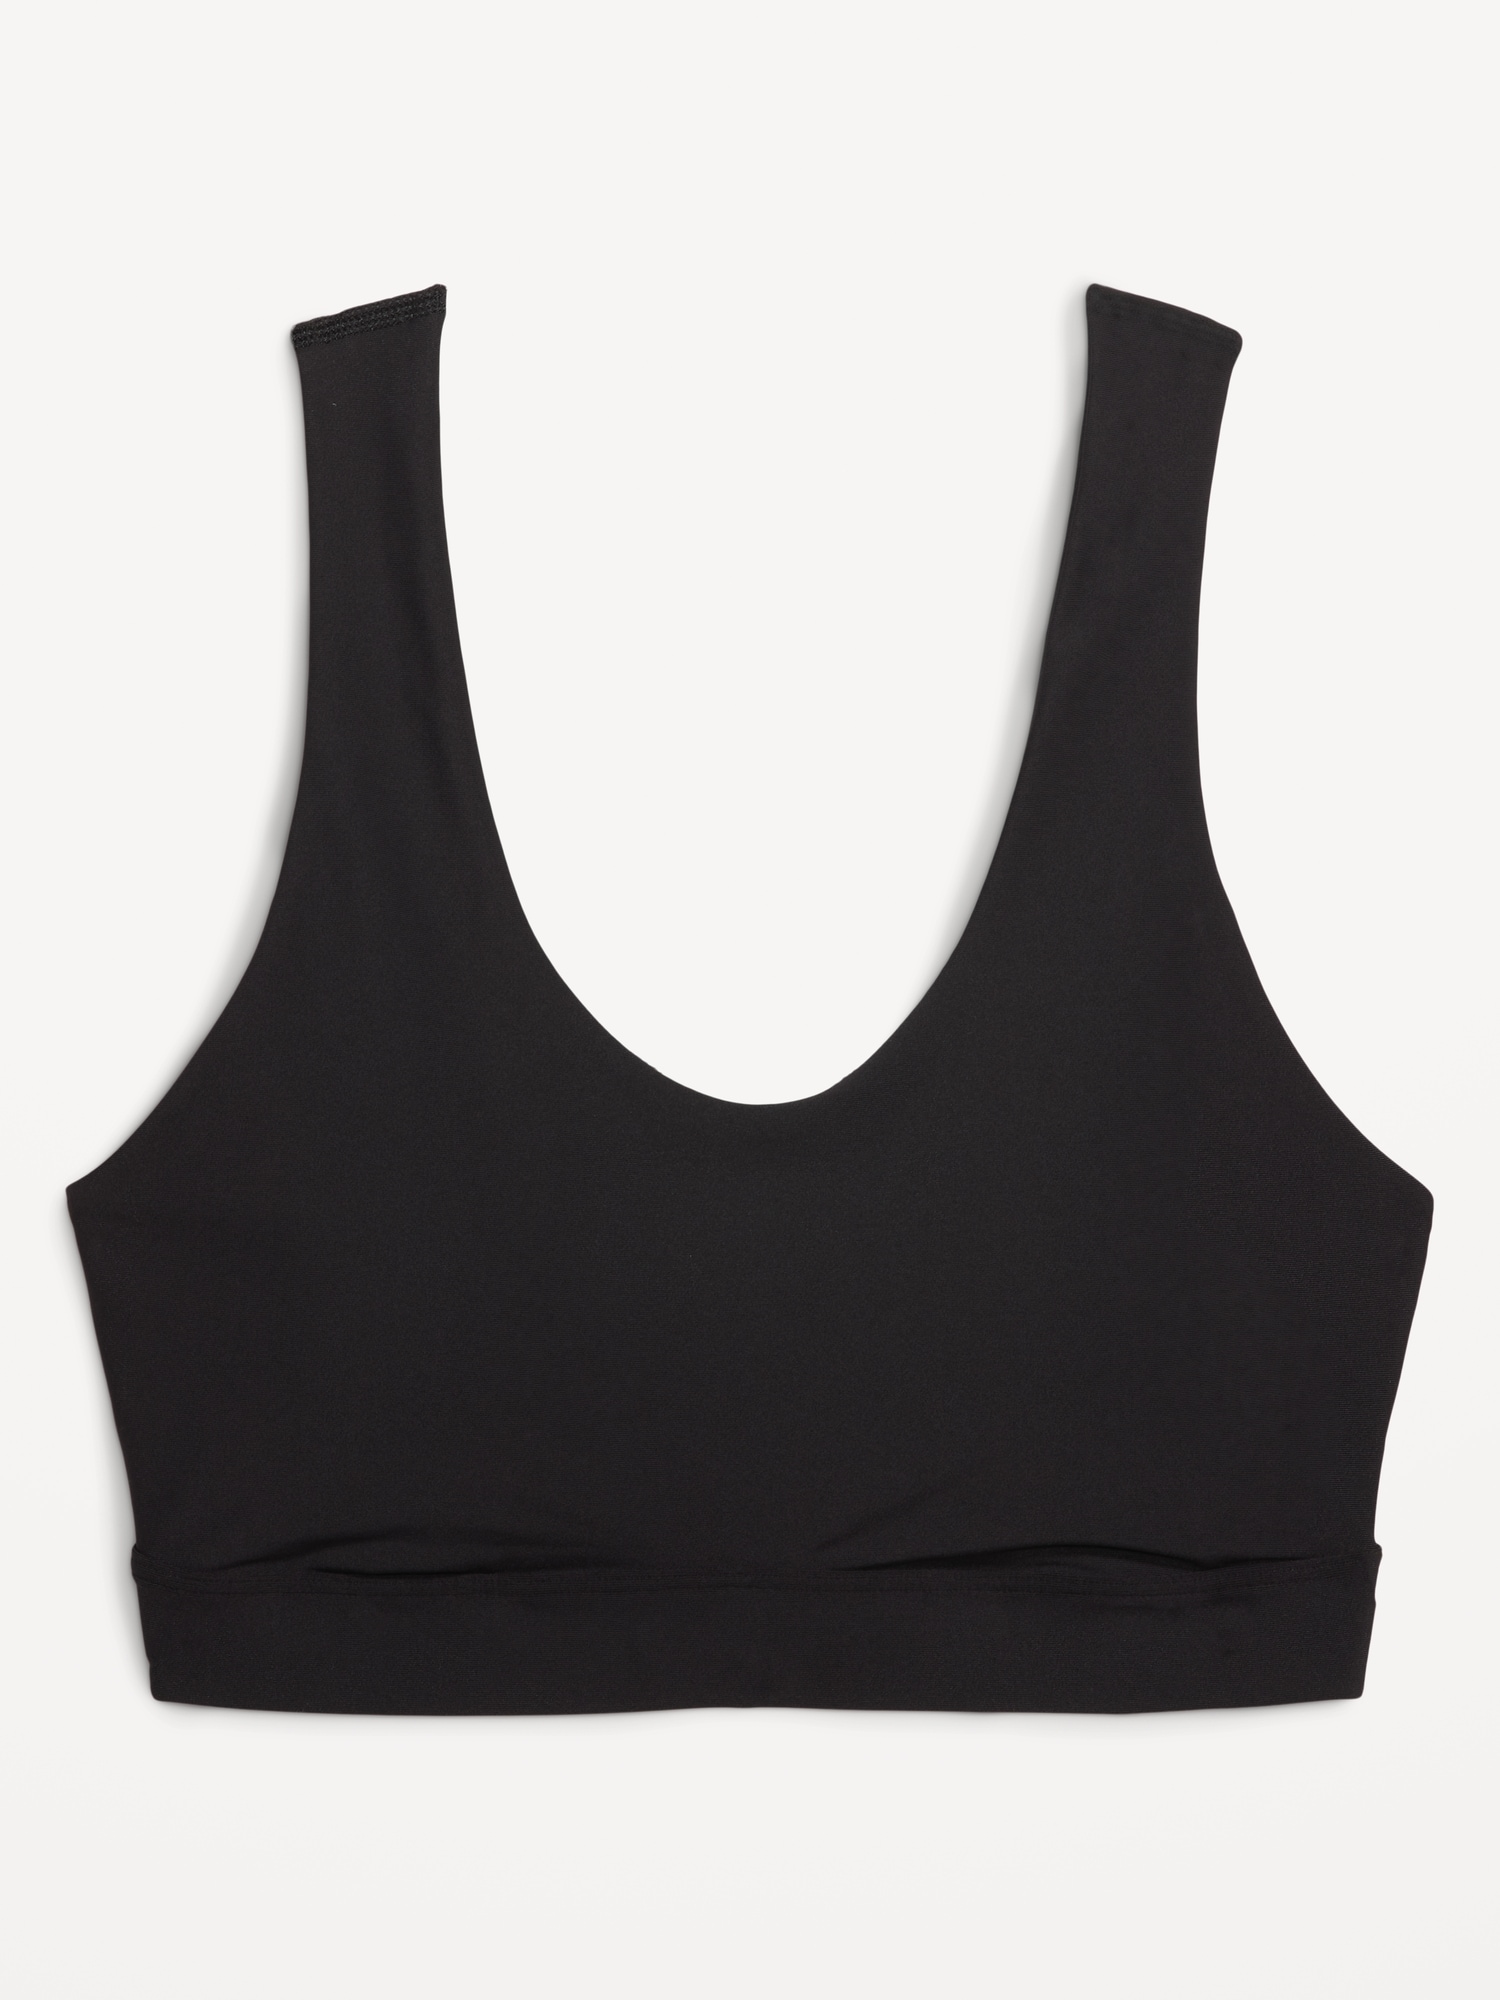 GAP Woman's Optical White Sports bralette with crossover straps